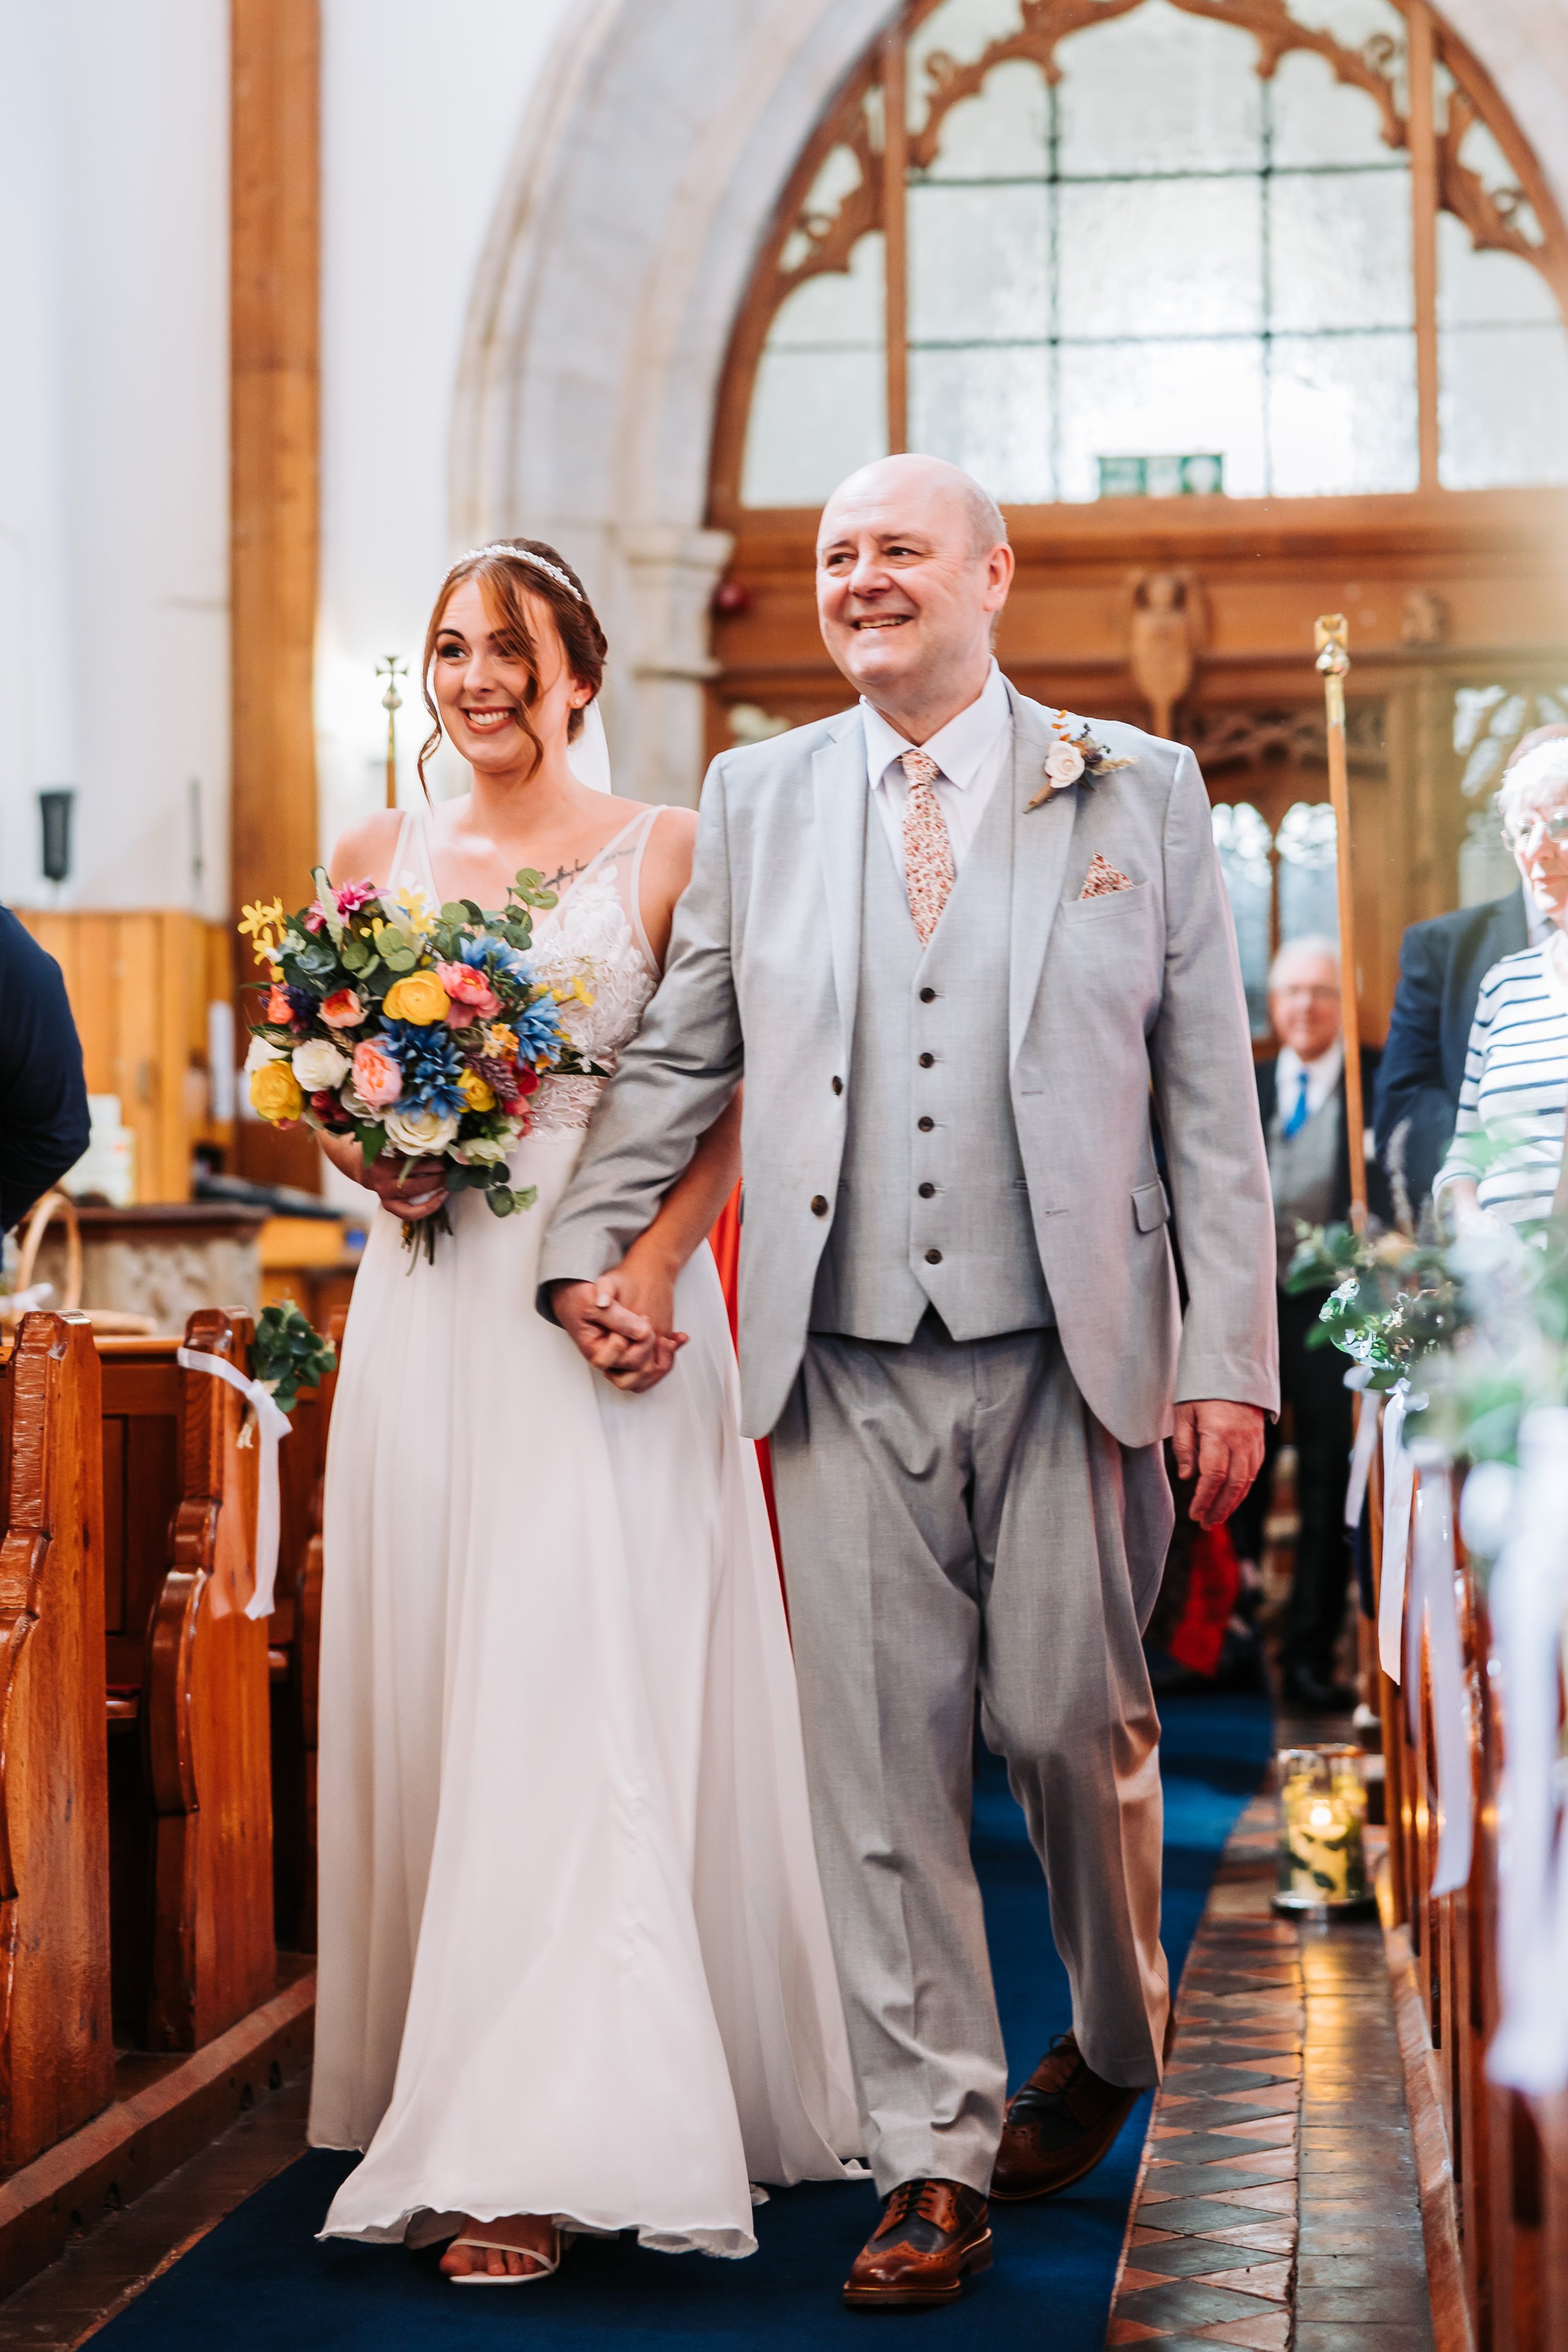 The Pumping Station Leicestershire Wedding Photographer 13.jpg